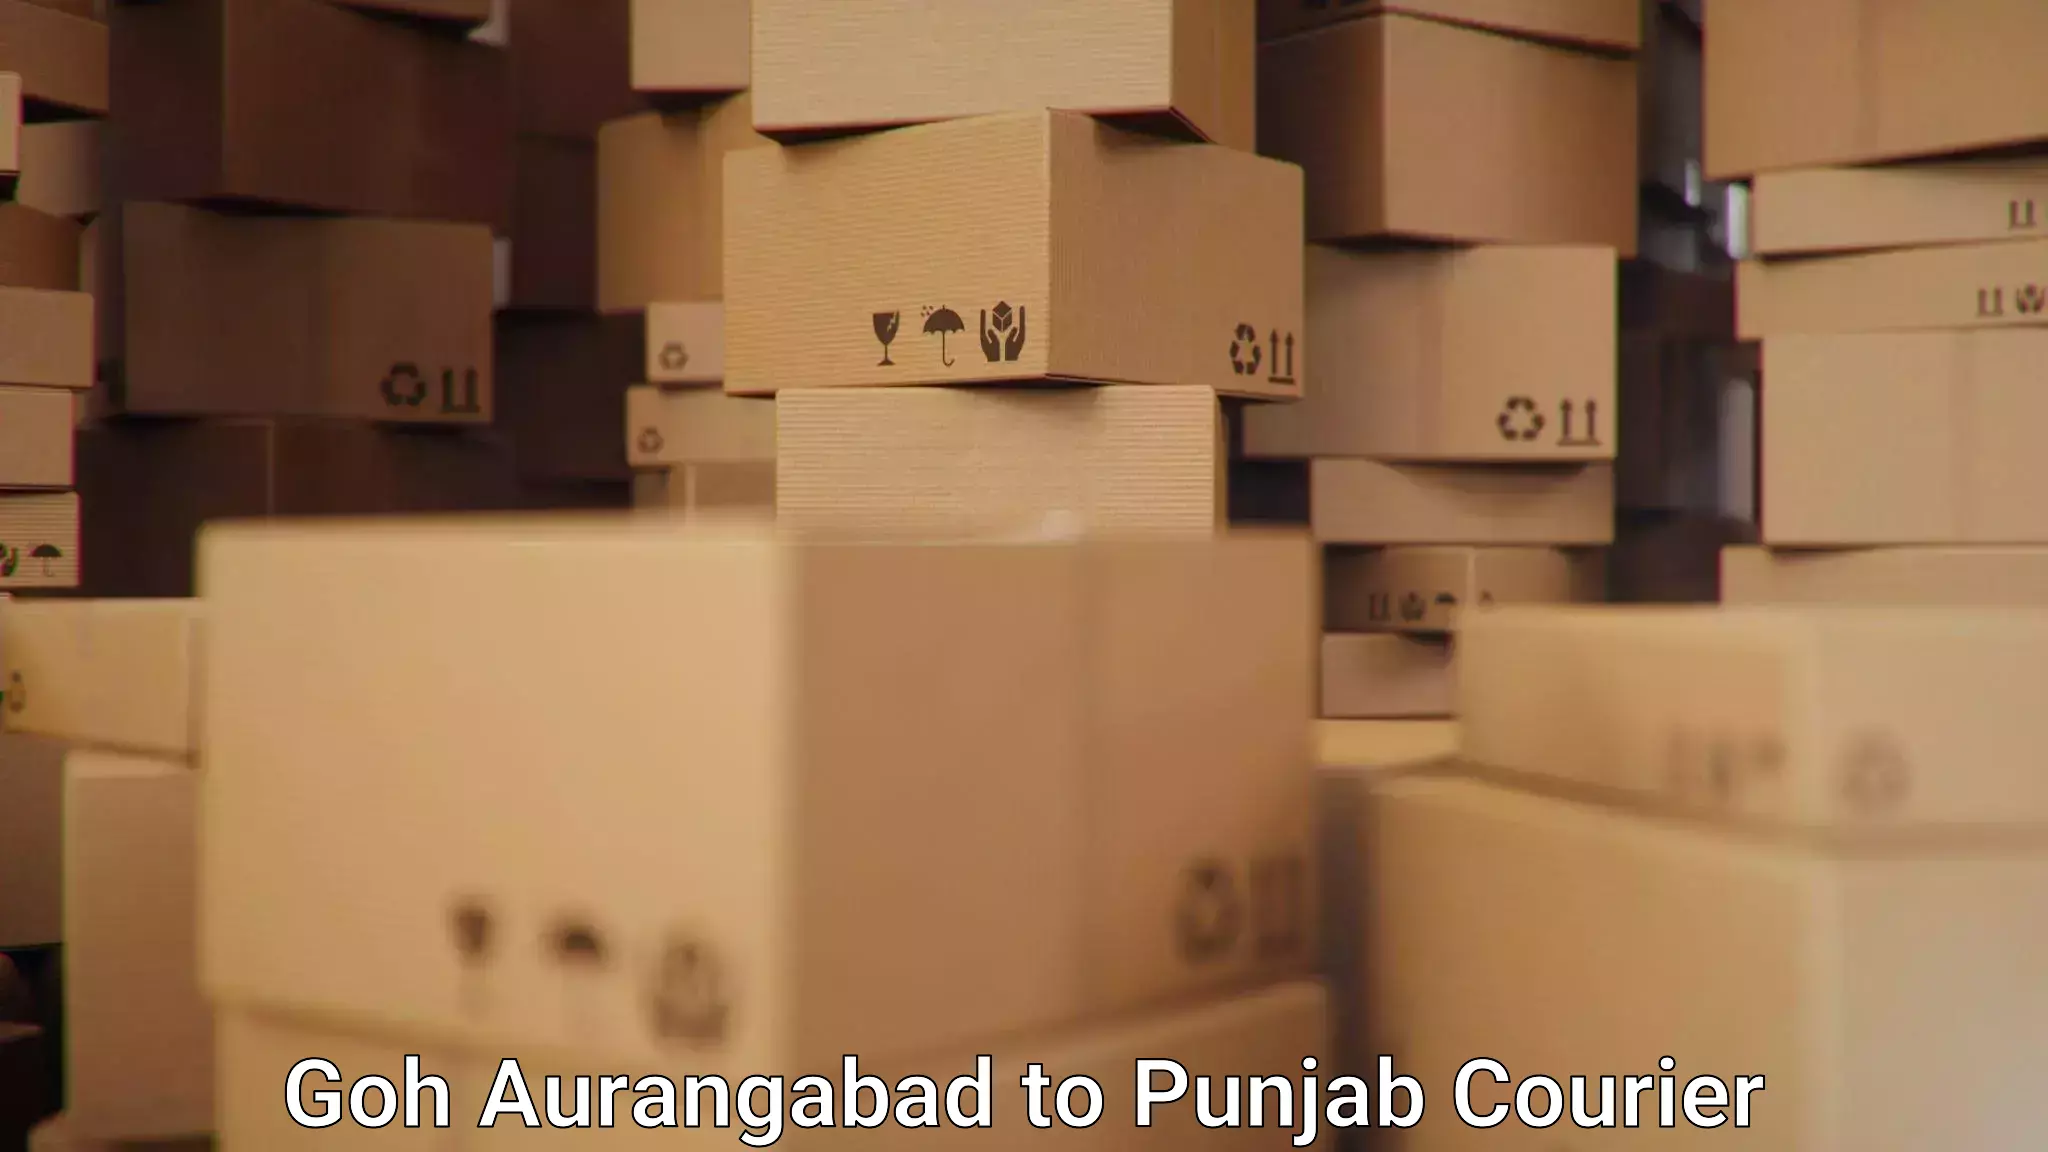 Fast shipping solutions in Goh Aurangabad to Ajnala